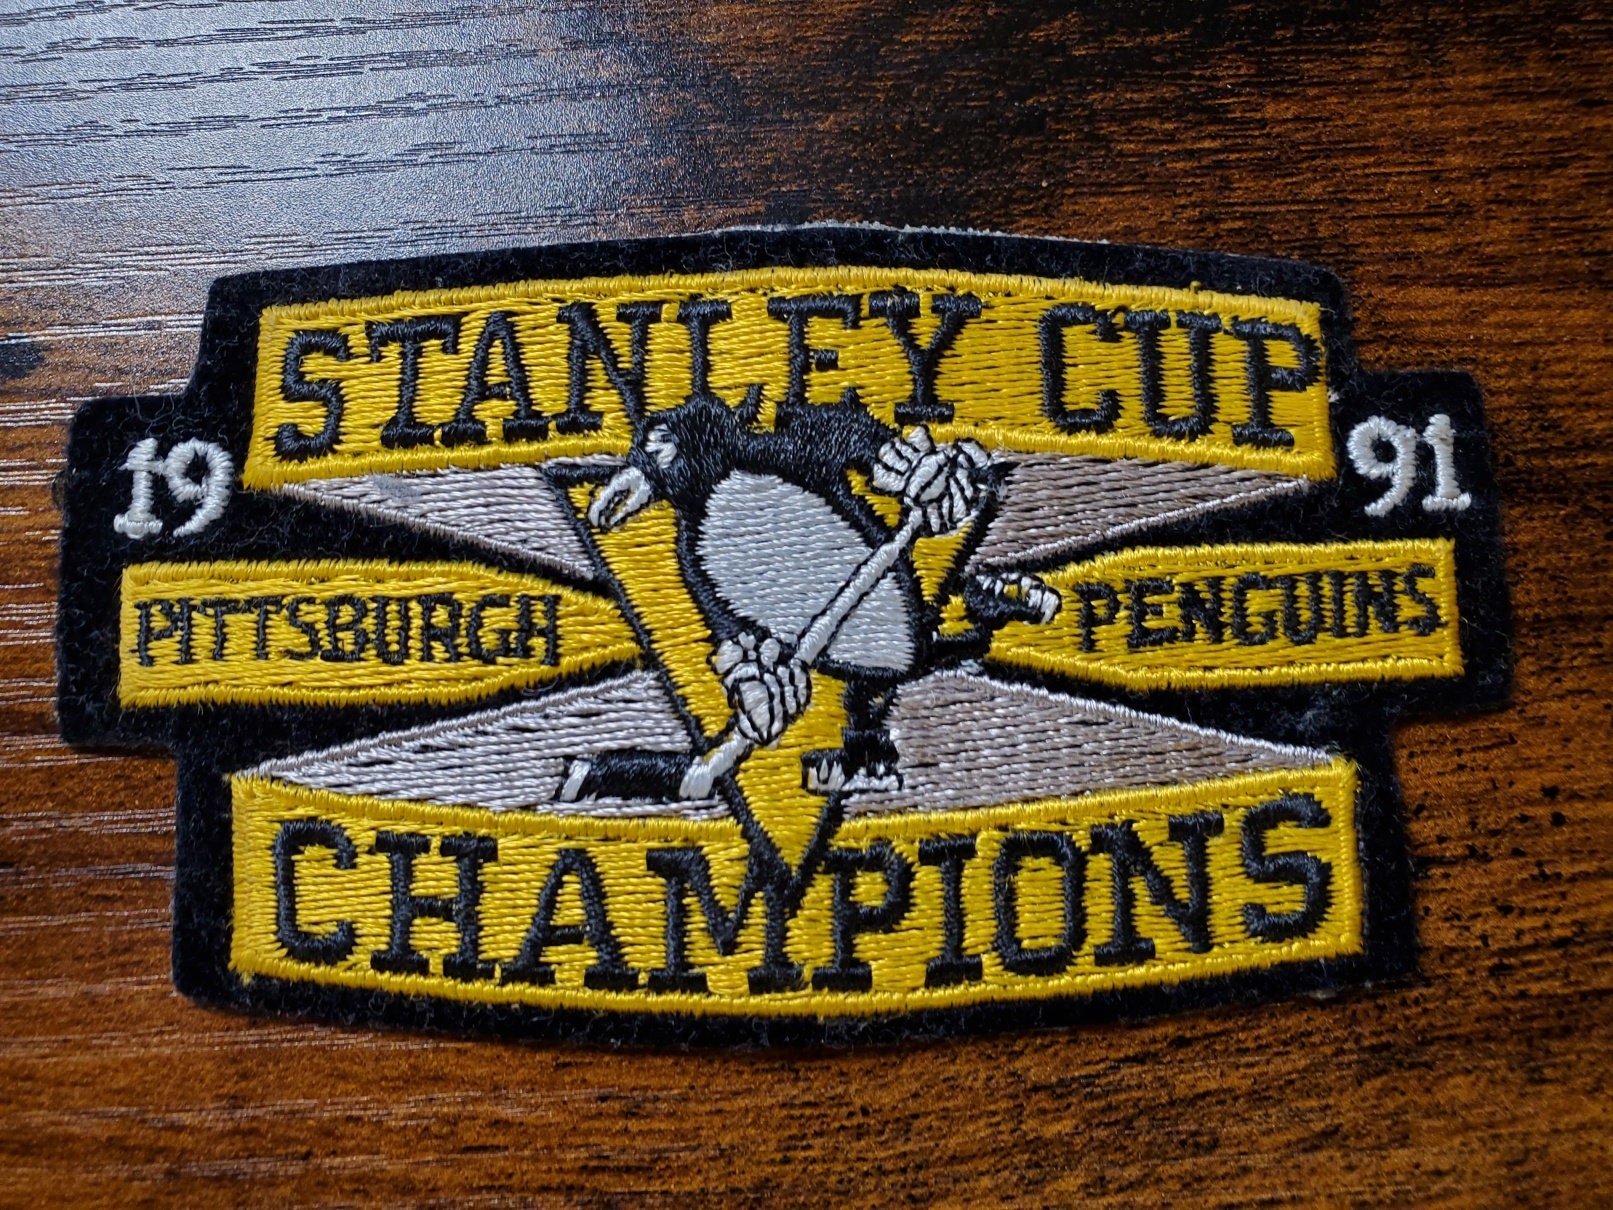  1992 NHL Stanley Cup Final Patch Championship Wales